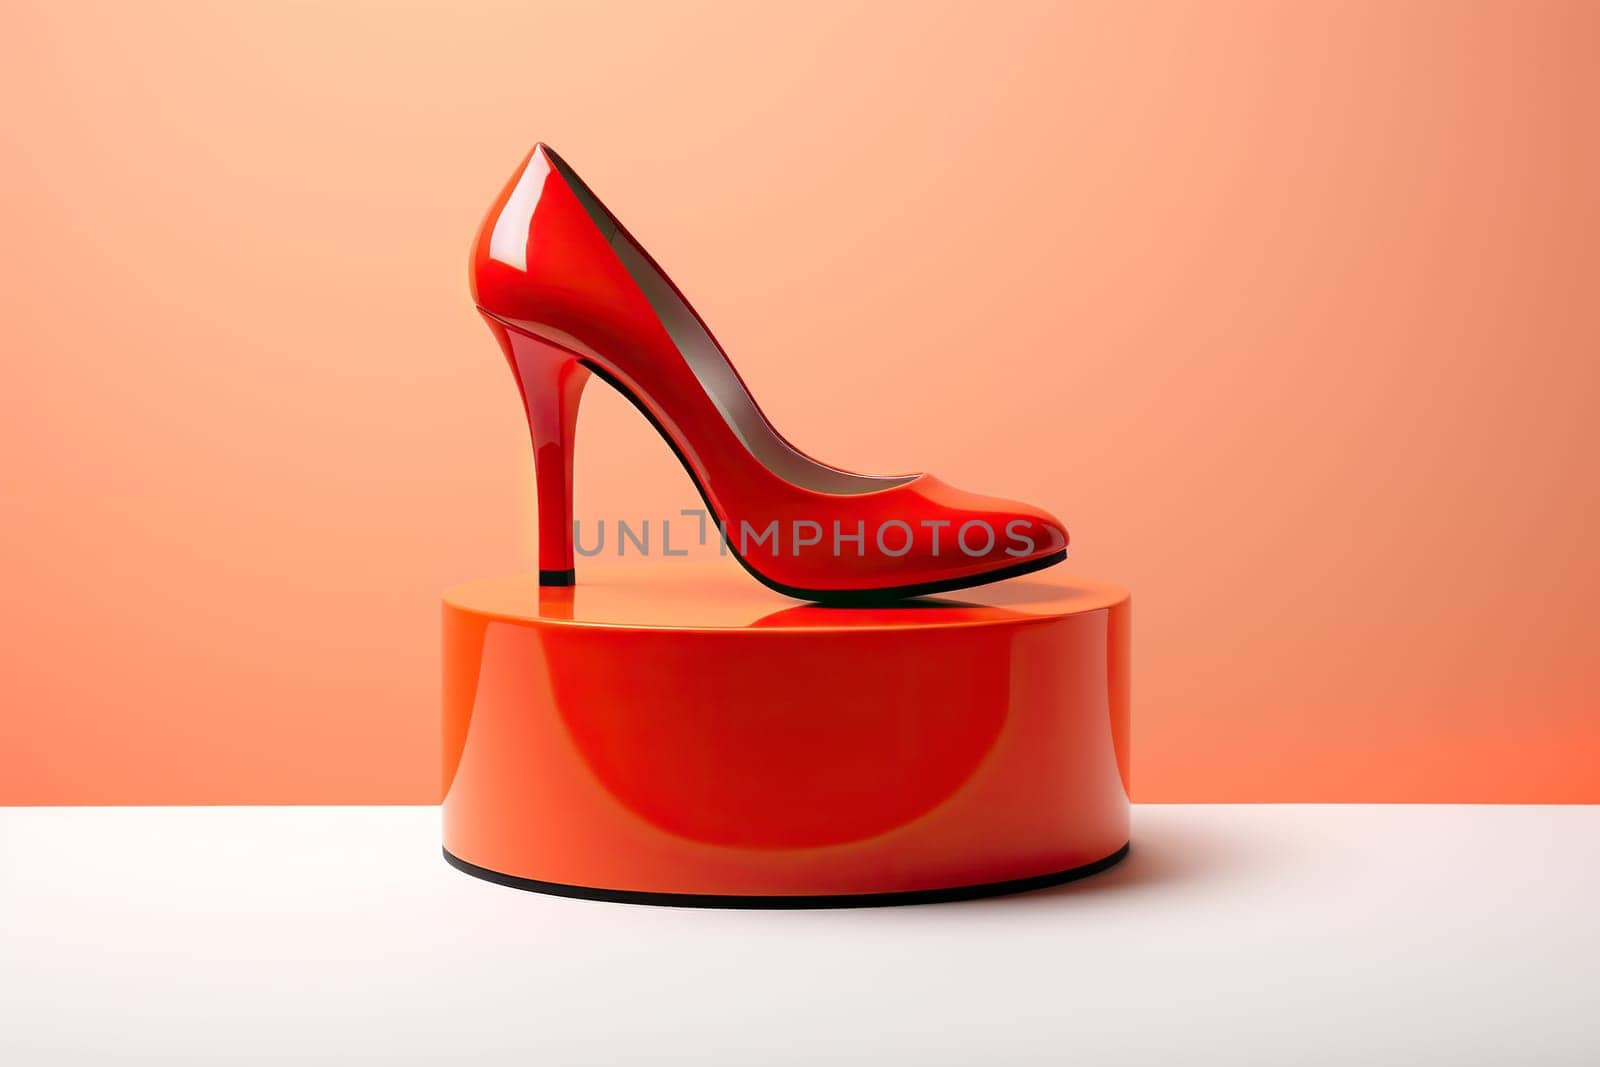 Beautiful elegant red women's high heel shoes standing on a red podium. Side view by Vovmar